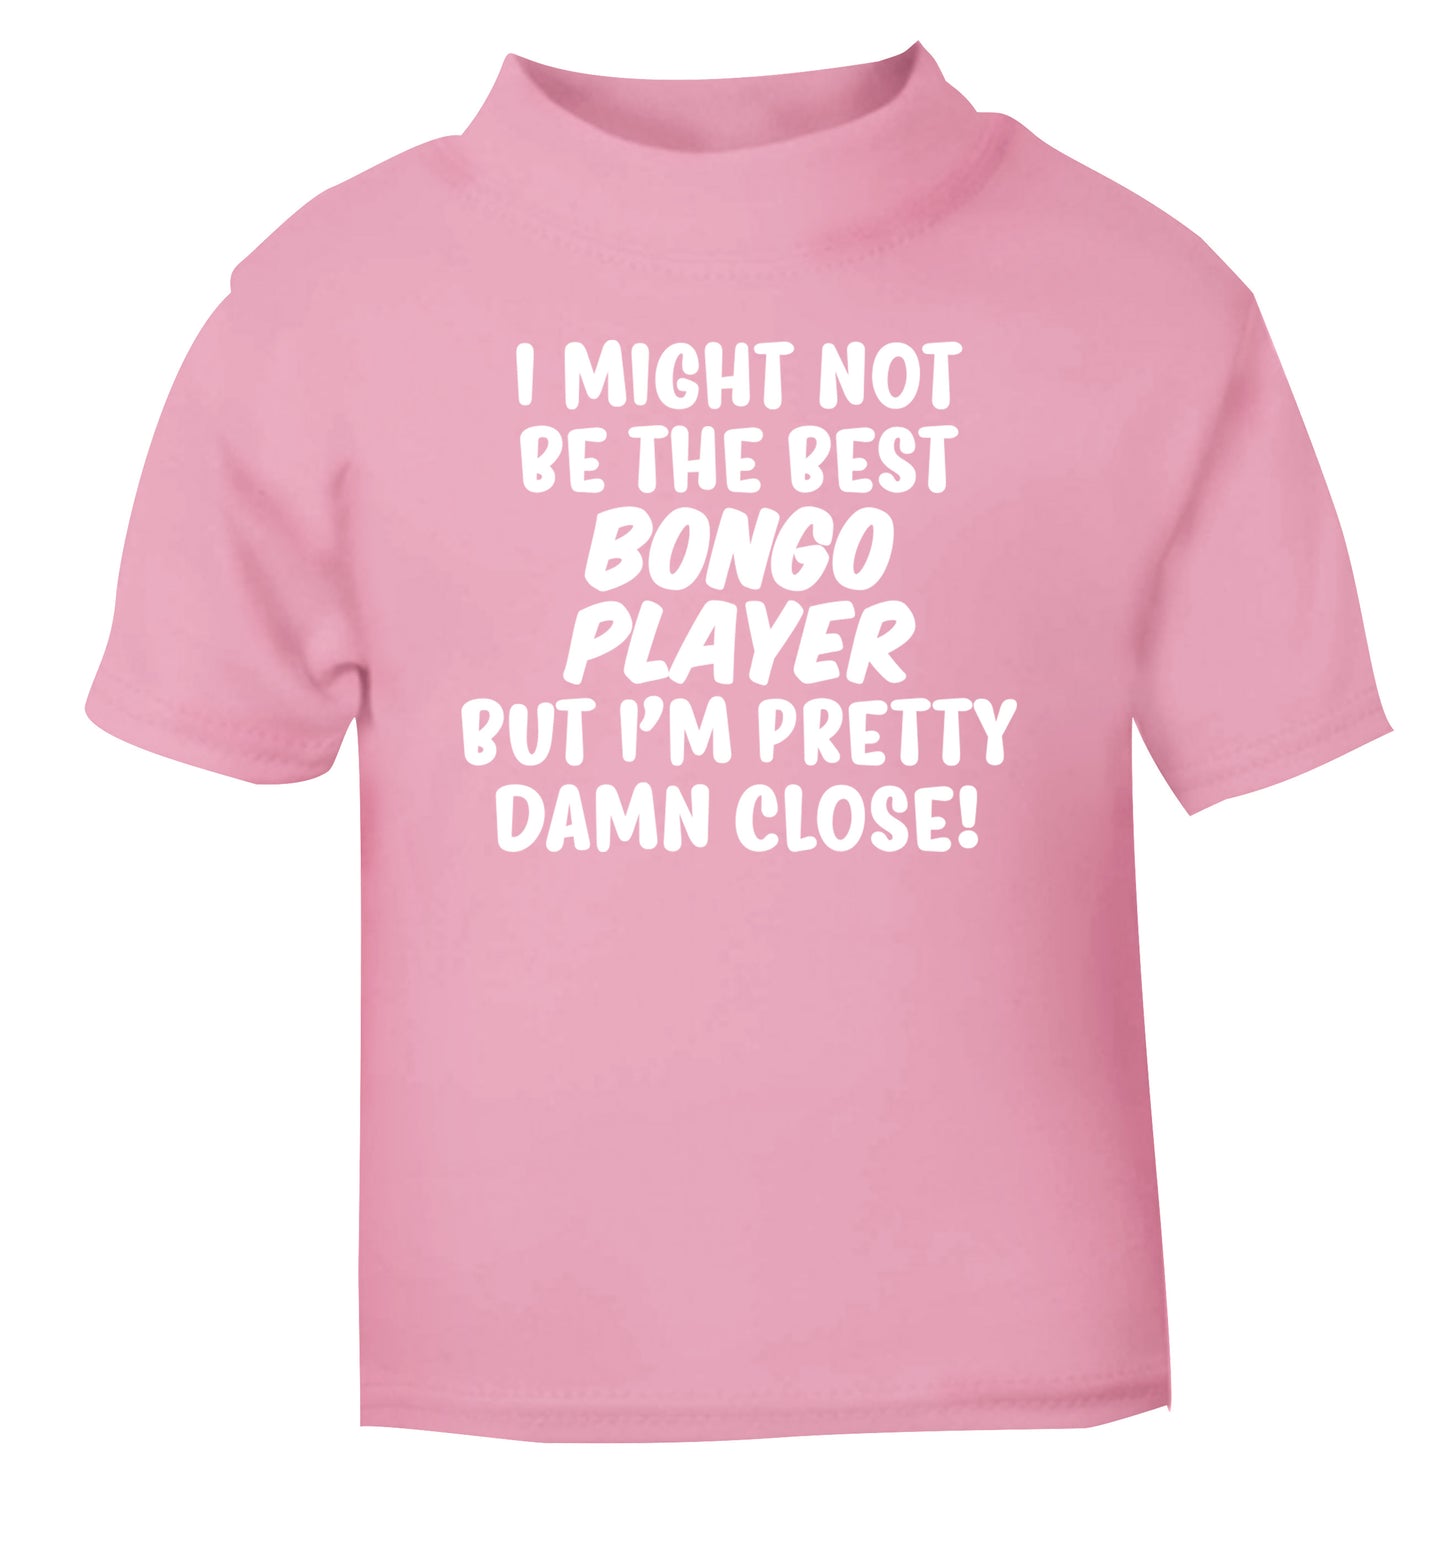 I might not be the best bongo player but I'm pretty close! light pink Baby Toddler Tshirt 2 Years